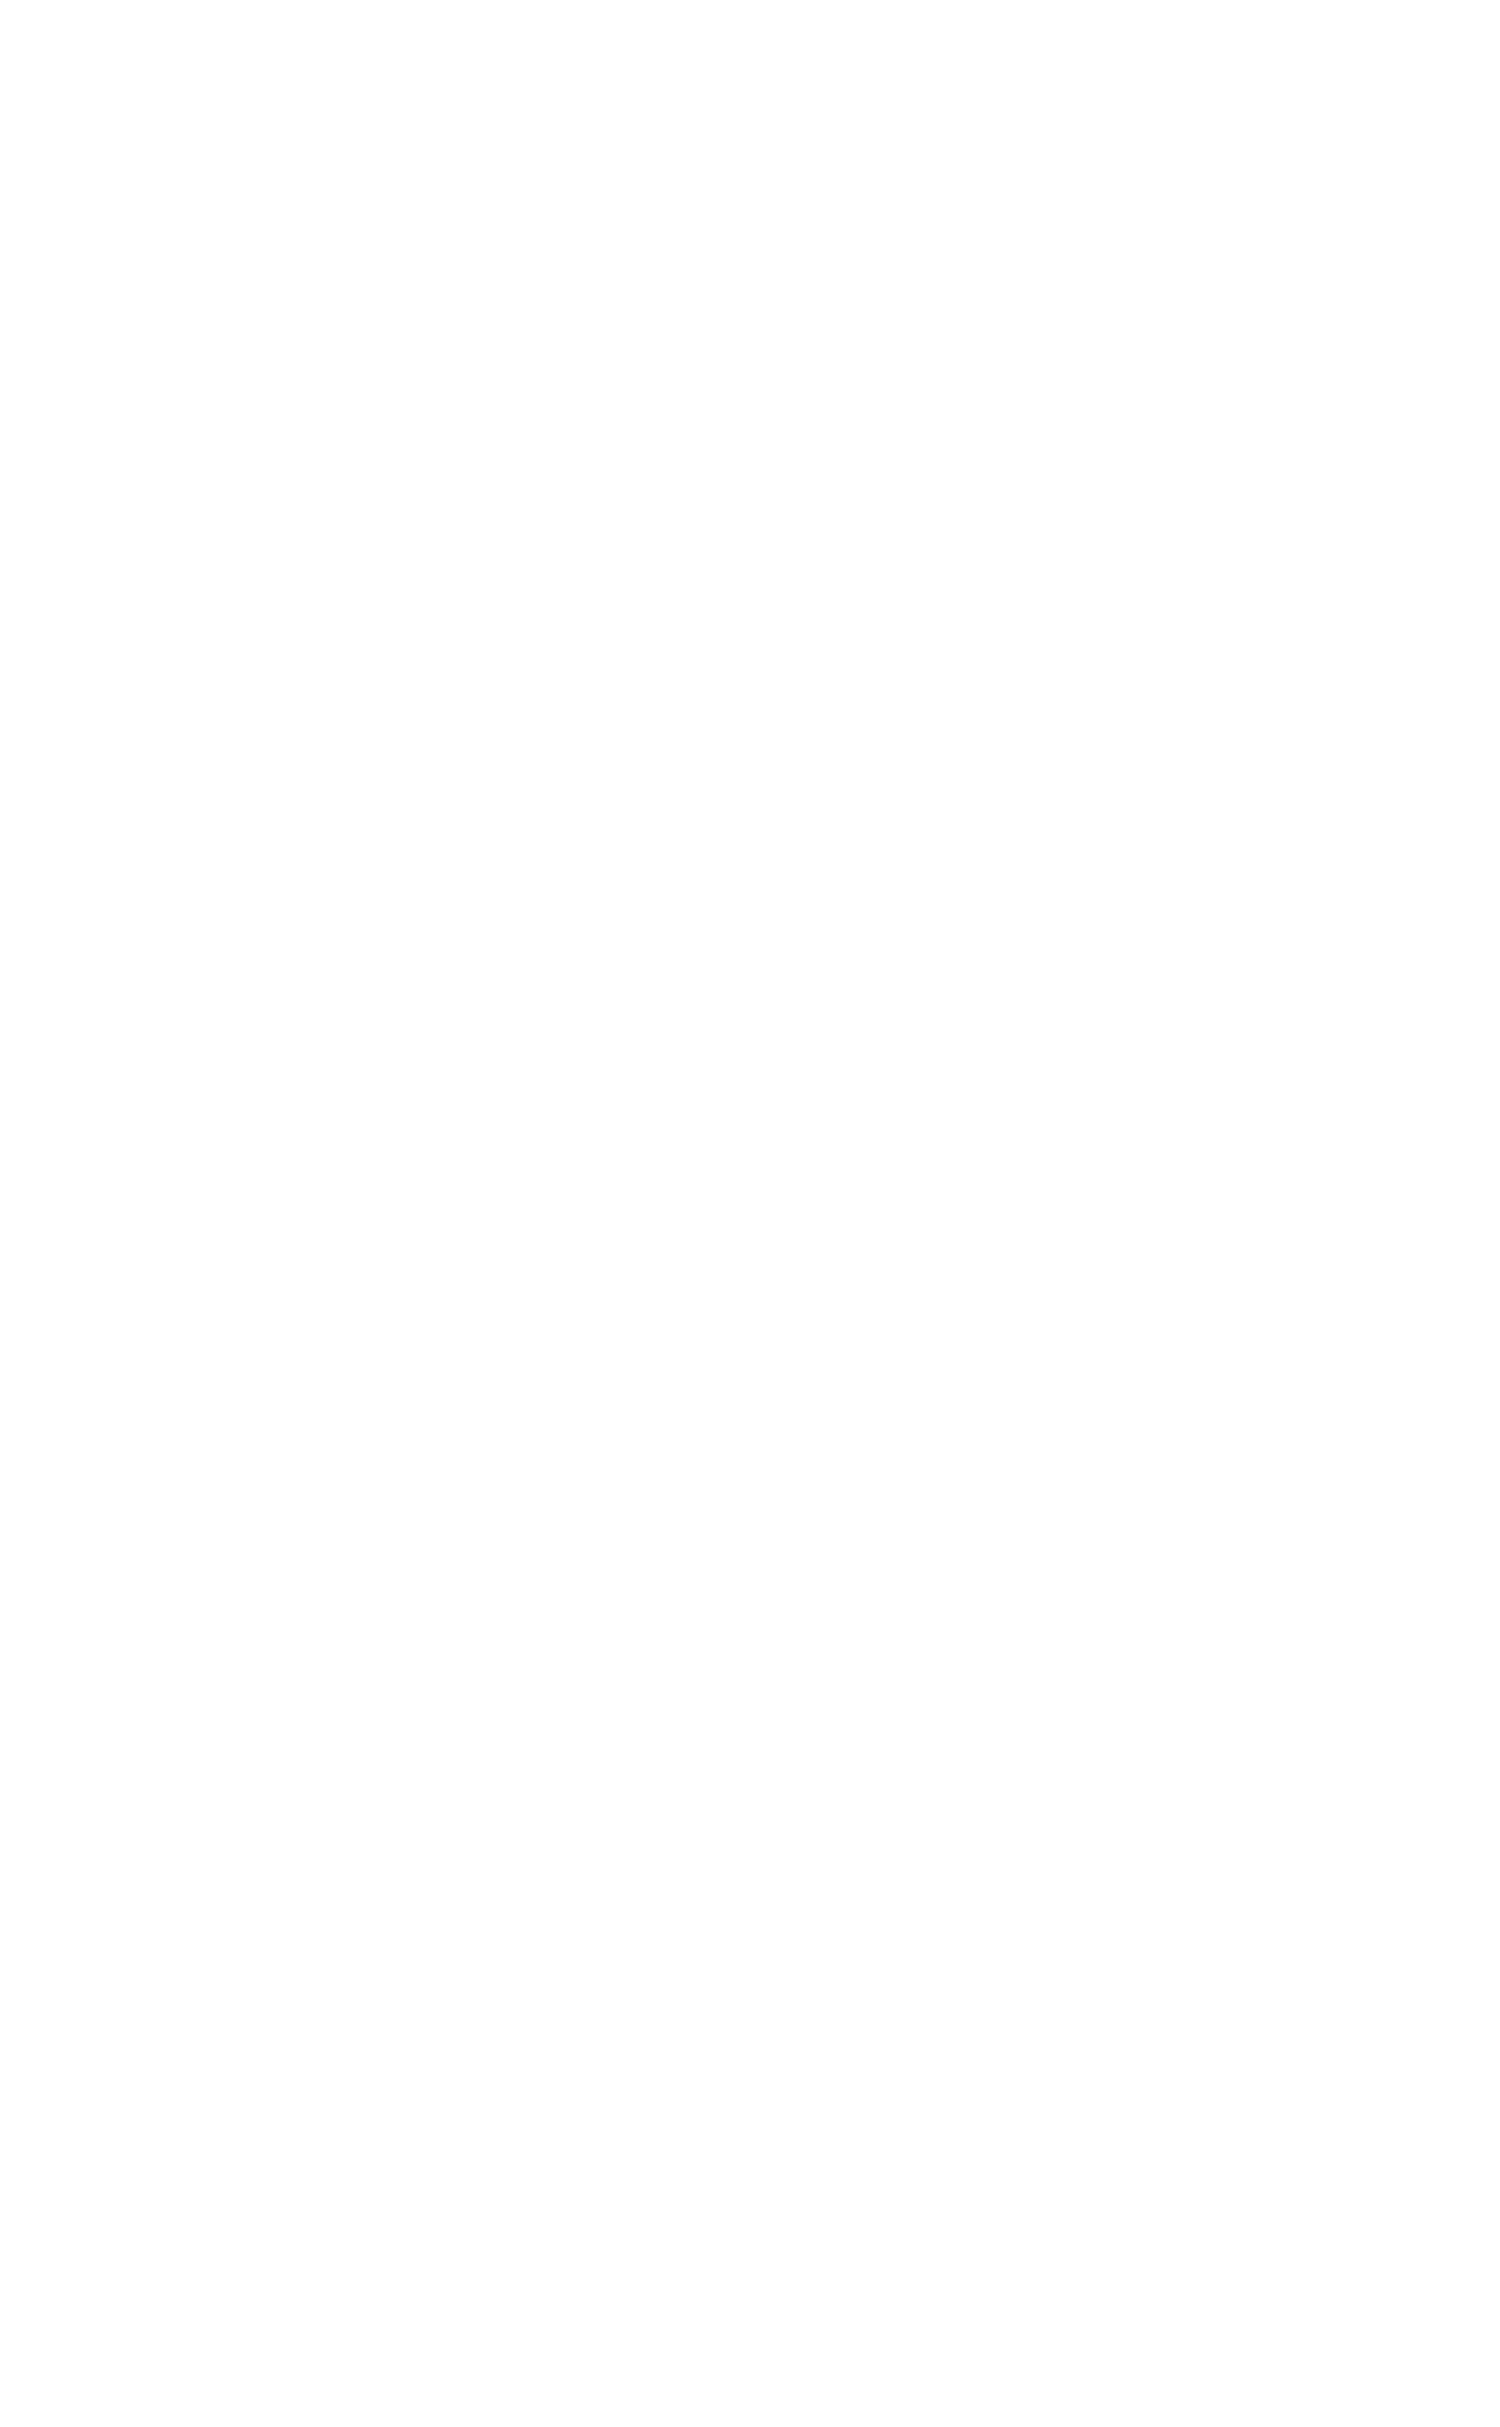 Sangster Sounds